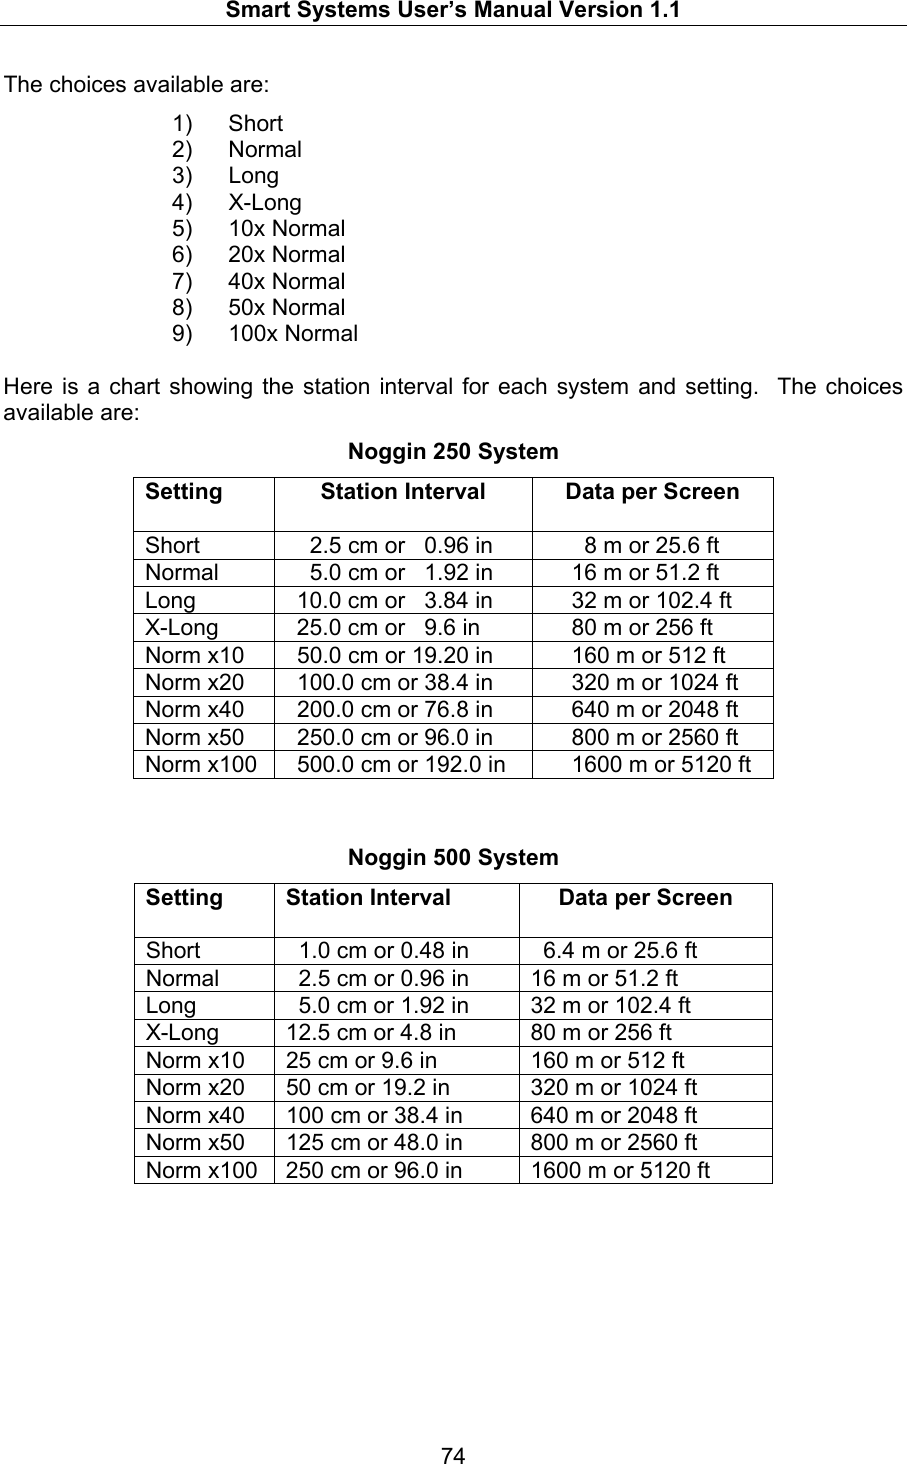   Smart Systems User’s Manual Version 1.1  74  The choices available are: 1) Short 2) Normal 3) Long 4) X-Long 5) 10x Normal 6) 20x Normal 7) 40x Normal 8) 50x Normal 9) 100x Normal  Here is a chart showing the station interval for each system and setting.  The choices available are: Noggin 250 System Setting  Station Interval  Data per Screen Short    2.5 cm or   0.96 in    8 m or 25.6 ft Normal    5.0 cm or   1.92 in  16 m or 51.2 ft Long  10.0 cm or   3.84 in  32 m or 102.4 ft X-Long  25.0 cm or   9.6 in  80 m or 256 ft Norm x10  50.0 cm or 19.20 in  160 m or 512 ft Norm x20  100.0 cm or 38.4 in  320 m or 1024 ft Norm x40  200.0 cm or 76.8 in  640 m or 2048 ft Norm x50  250.0 cm or 96.0 in  800 m or 2560 ft Norm x100  500.0 cm or 192.0 in  1600 m or 5120 ft   Noggin 500 System Setting  Station Interval  Data per Screen Short    1.0 cm or 0.48 in    6.4 m or 25.6 ft Normal    2.5 cm or 0.96 in  16 m or 51.2 ft Long    5.0 cm or 1.92 in  32 m or 102.4 ft X-Long  12.5 cm or 4.8 in  80 m or 256 ft Norm x10  25 cm or 9.6 in  160 m or 512 ft Norm x20  50 cm or 19.2 in  320 m or 1024 ft Norm x40  100 cm or 38.4 in  640 m or 2048 ft Norm x50  125 cm or 48.0 in  800 m or 2560 ft Norm x100  250 cm or 96.0 in  1600 m or 5120 ft  